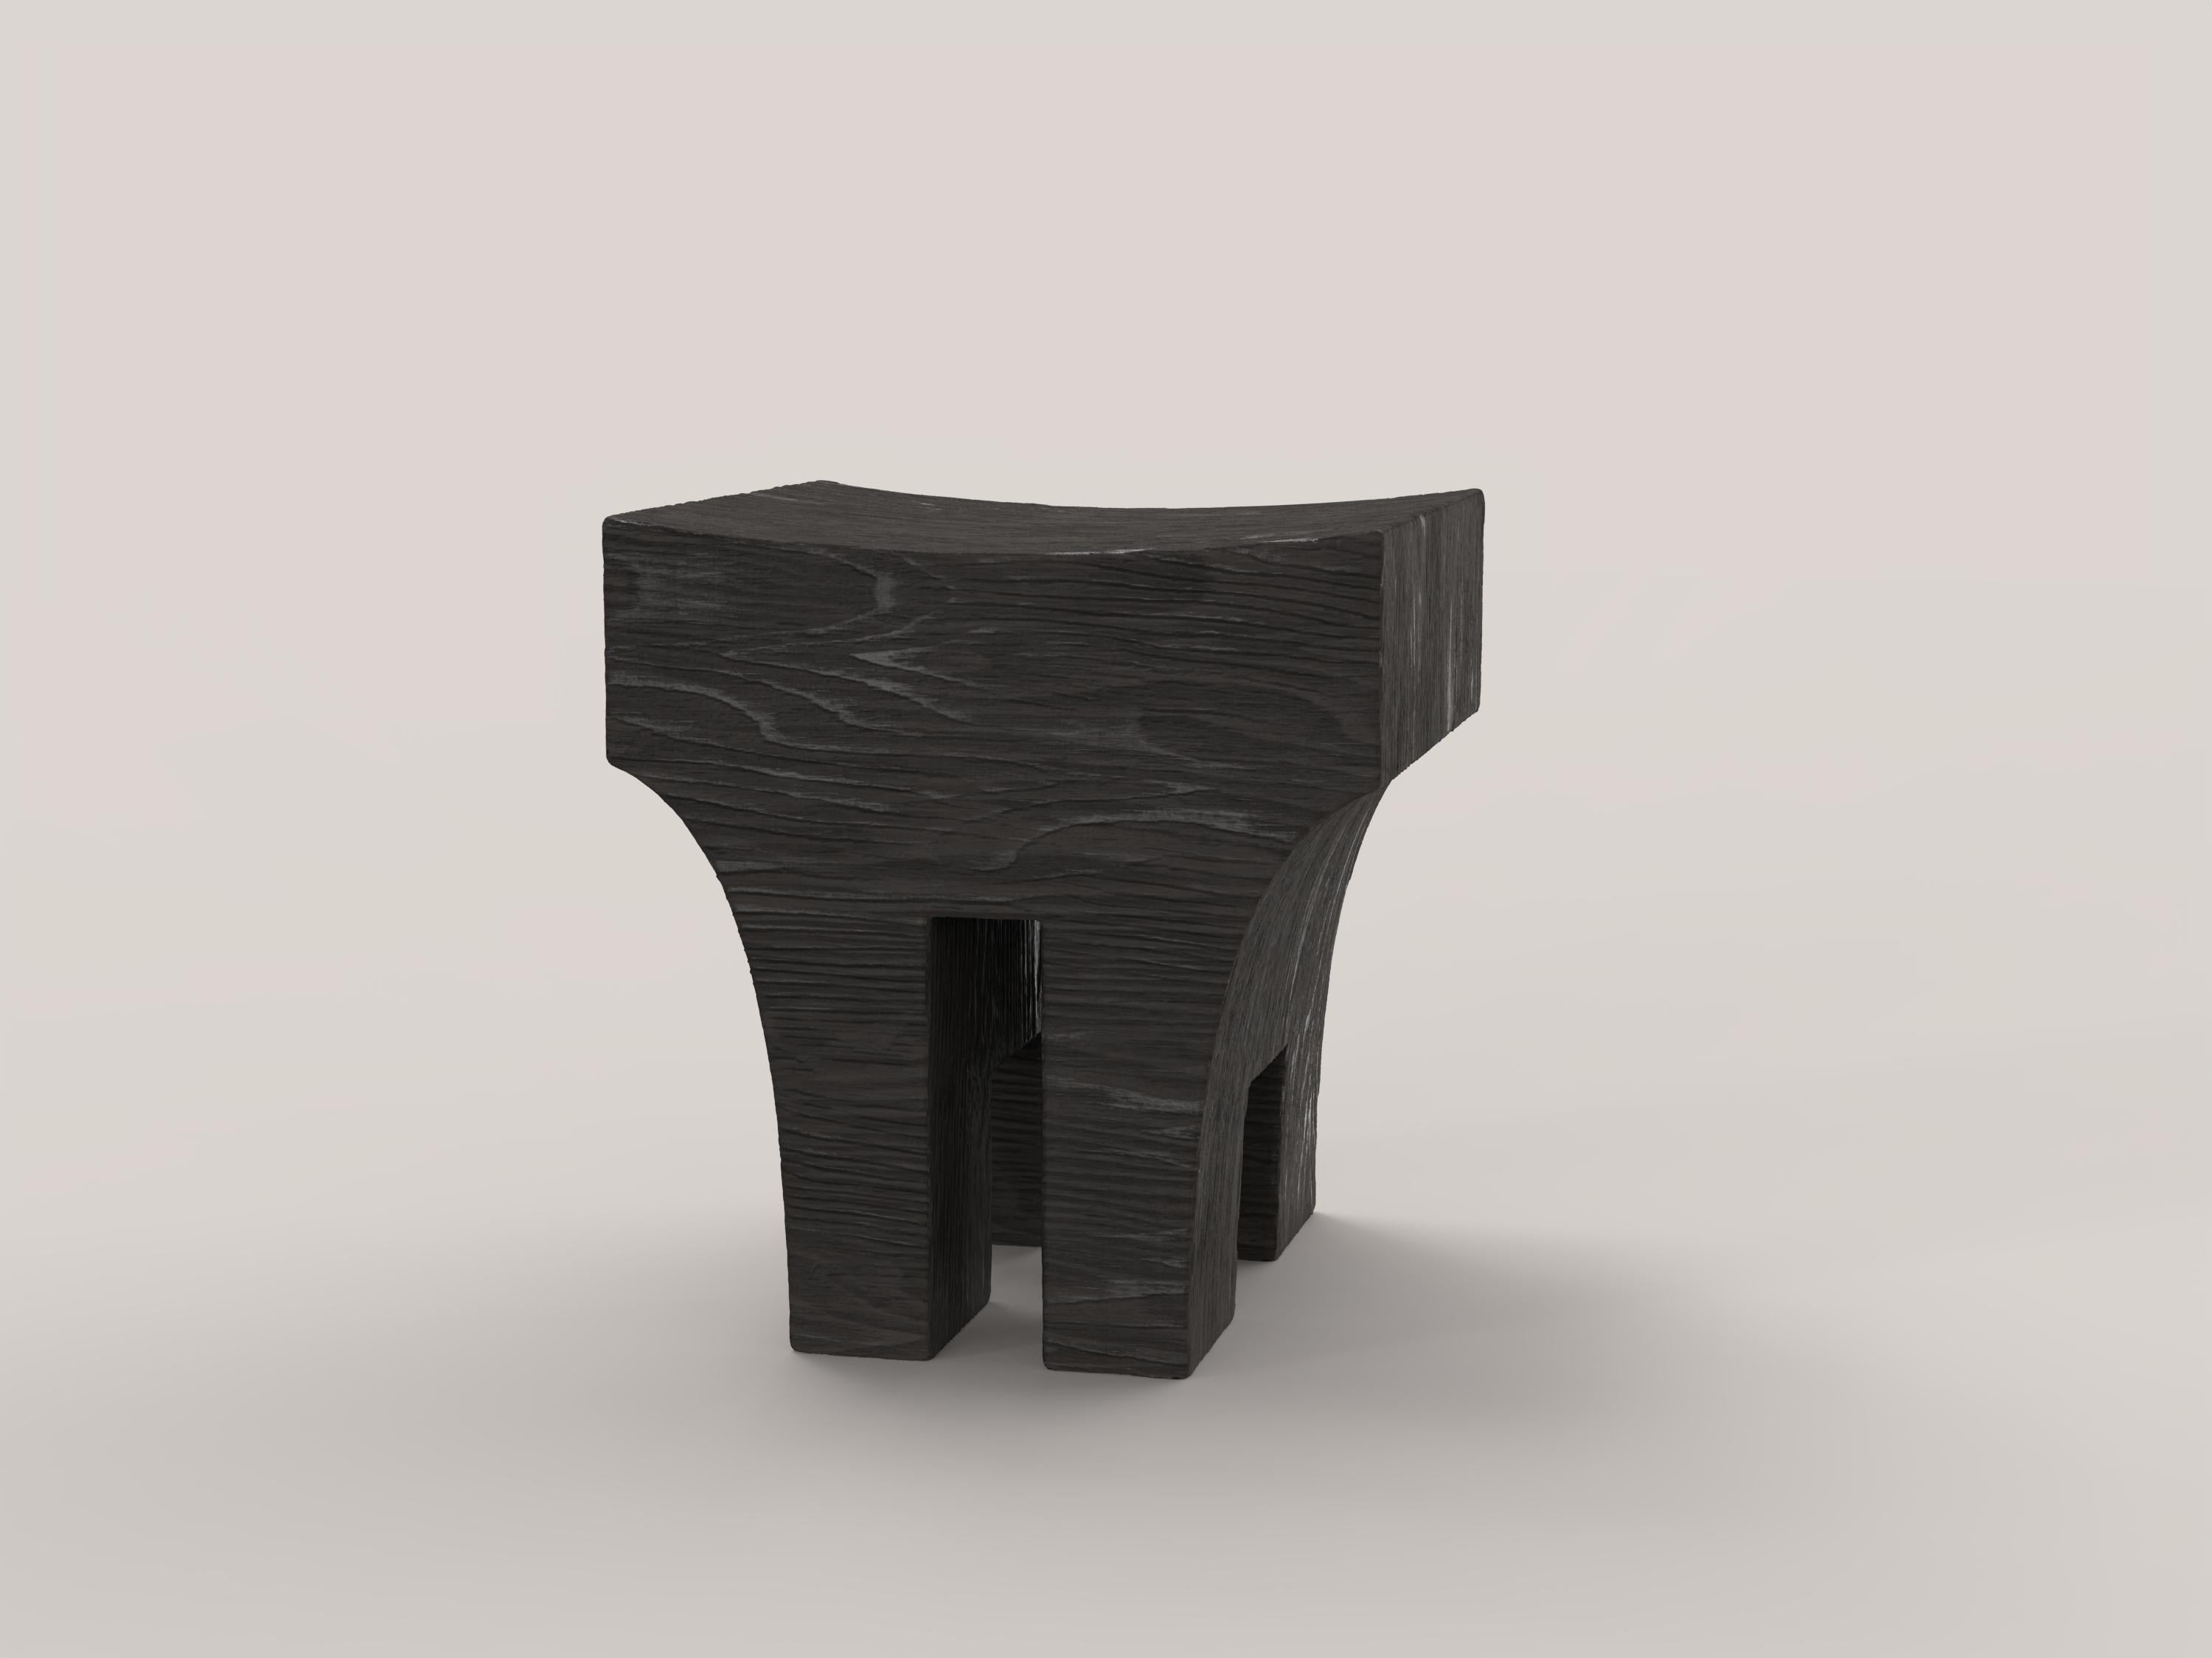 Mhono V1 Stool by Edizione Limitata
Limited edition of 150 pieces. Signed and numbered.
Dimensions: D 40 x W 35 x H 43 cm.
Materials: Charred solid wood.

This contemporary collection is a product of Italian craftmanship, starting entirely from